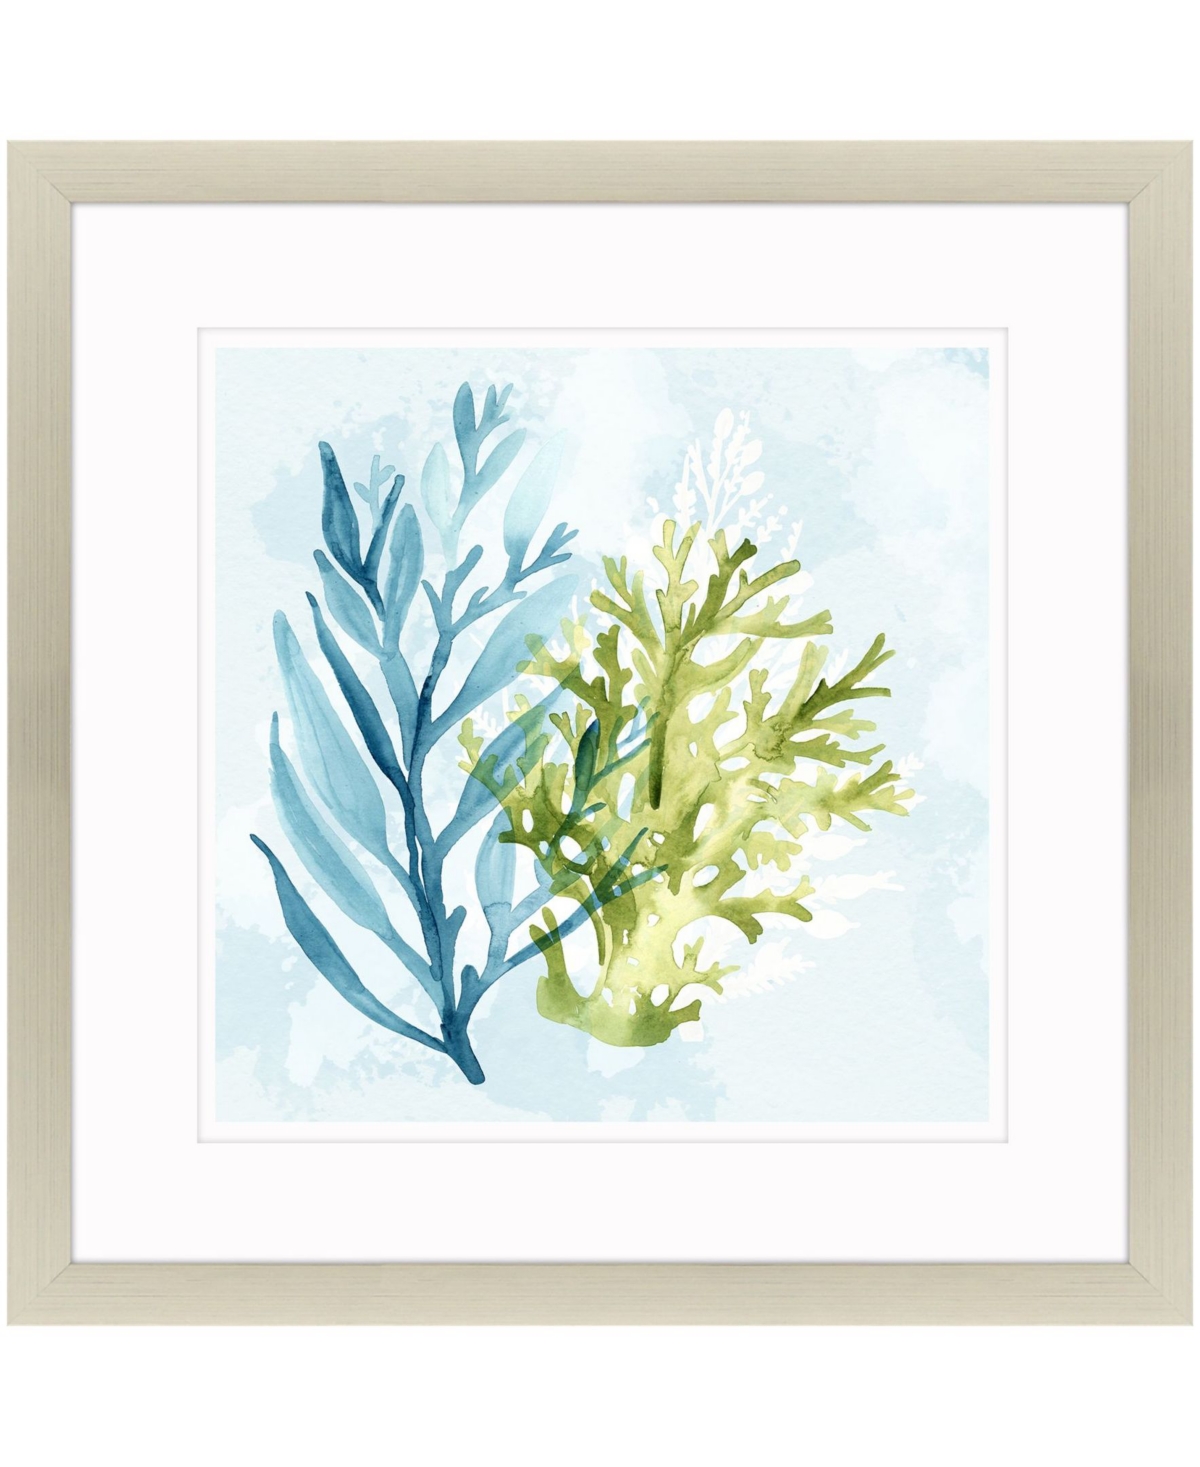 Paragon Picture Gallery Under Sea I Framed Art In Blue